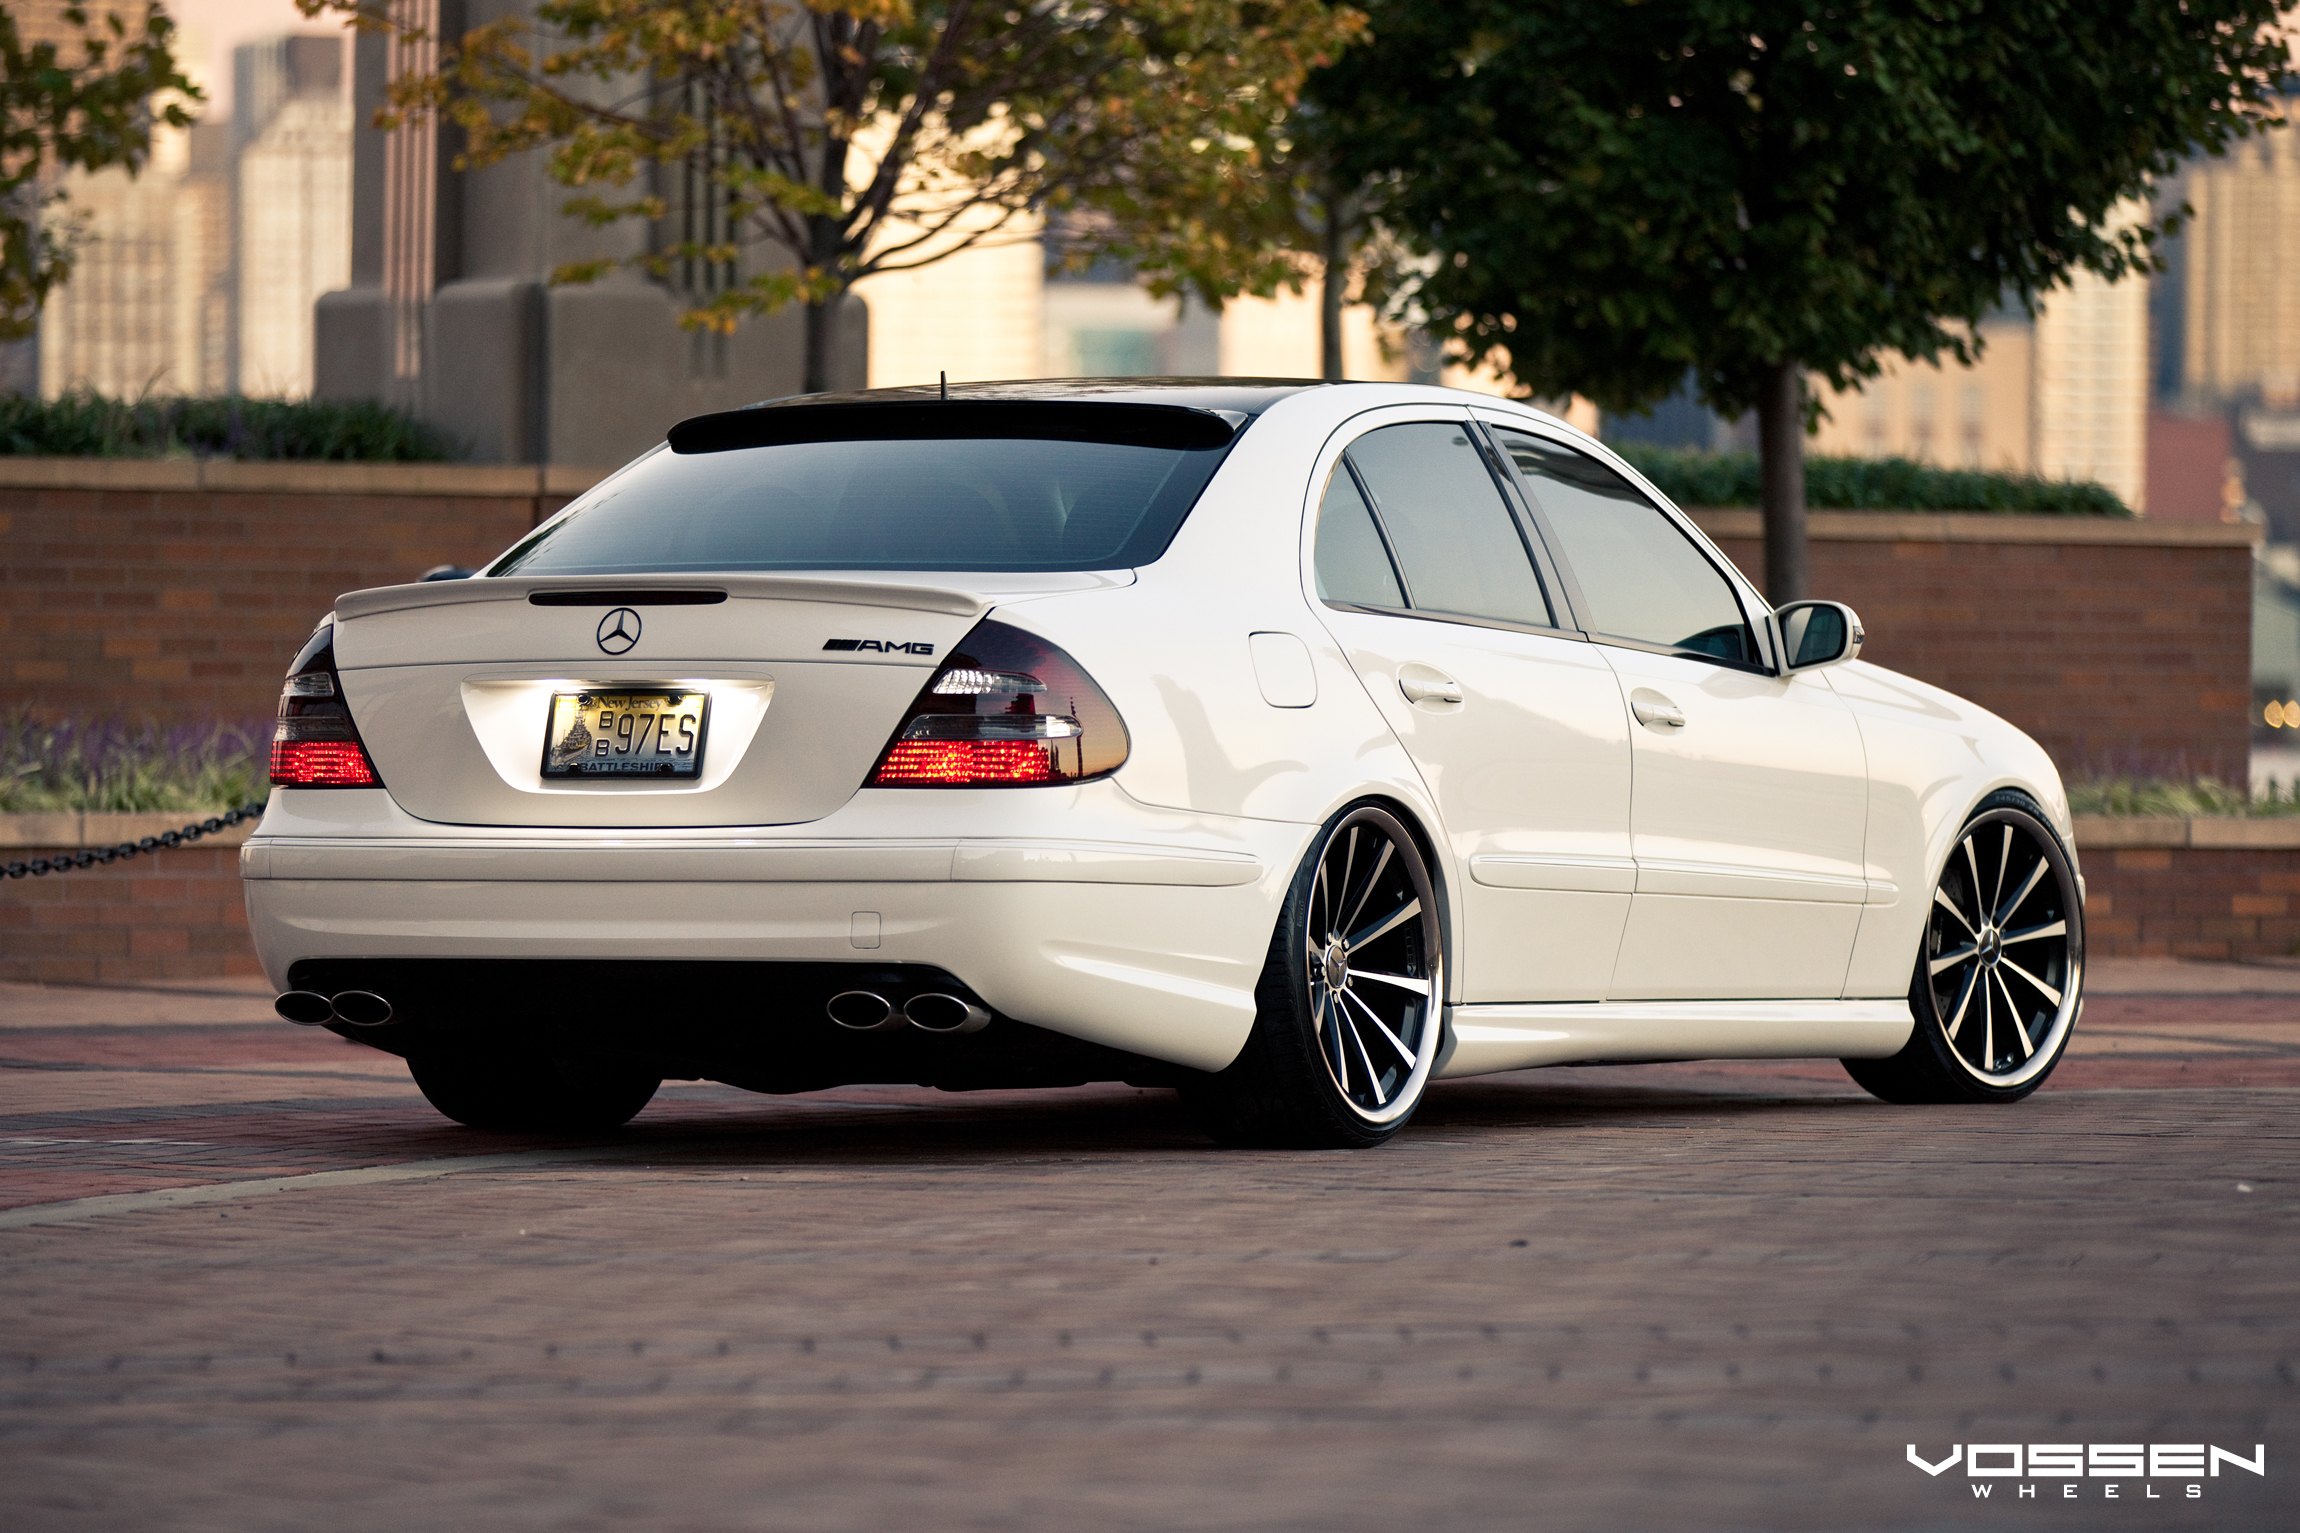 White Mercedes E Class with Roofline Spoiler - Photo by Vossen